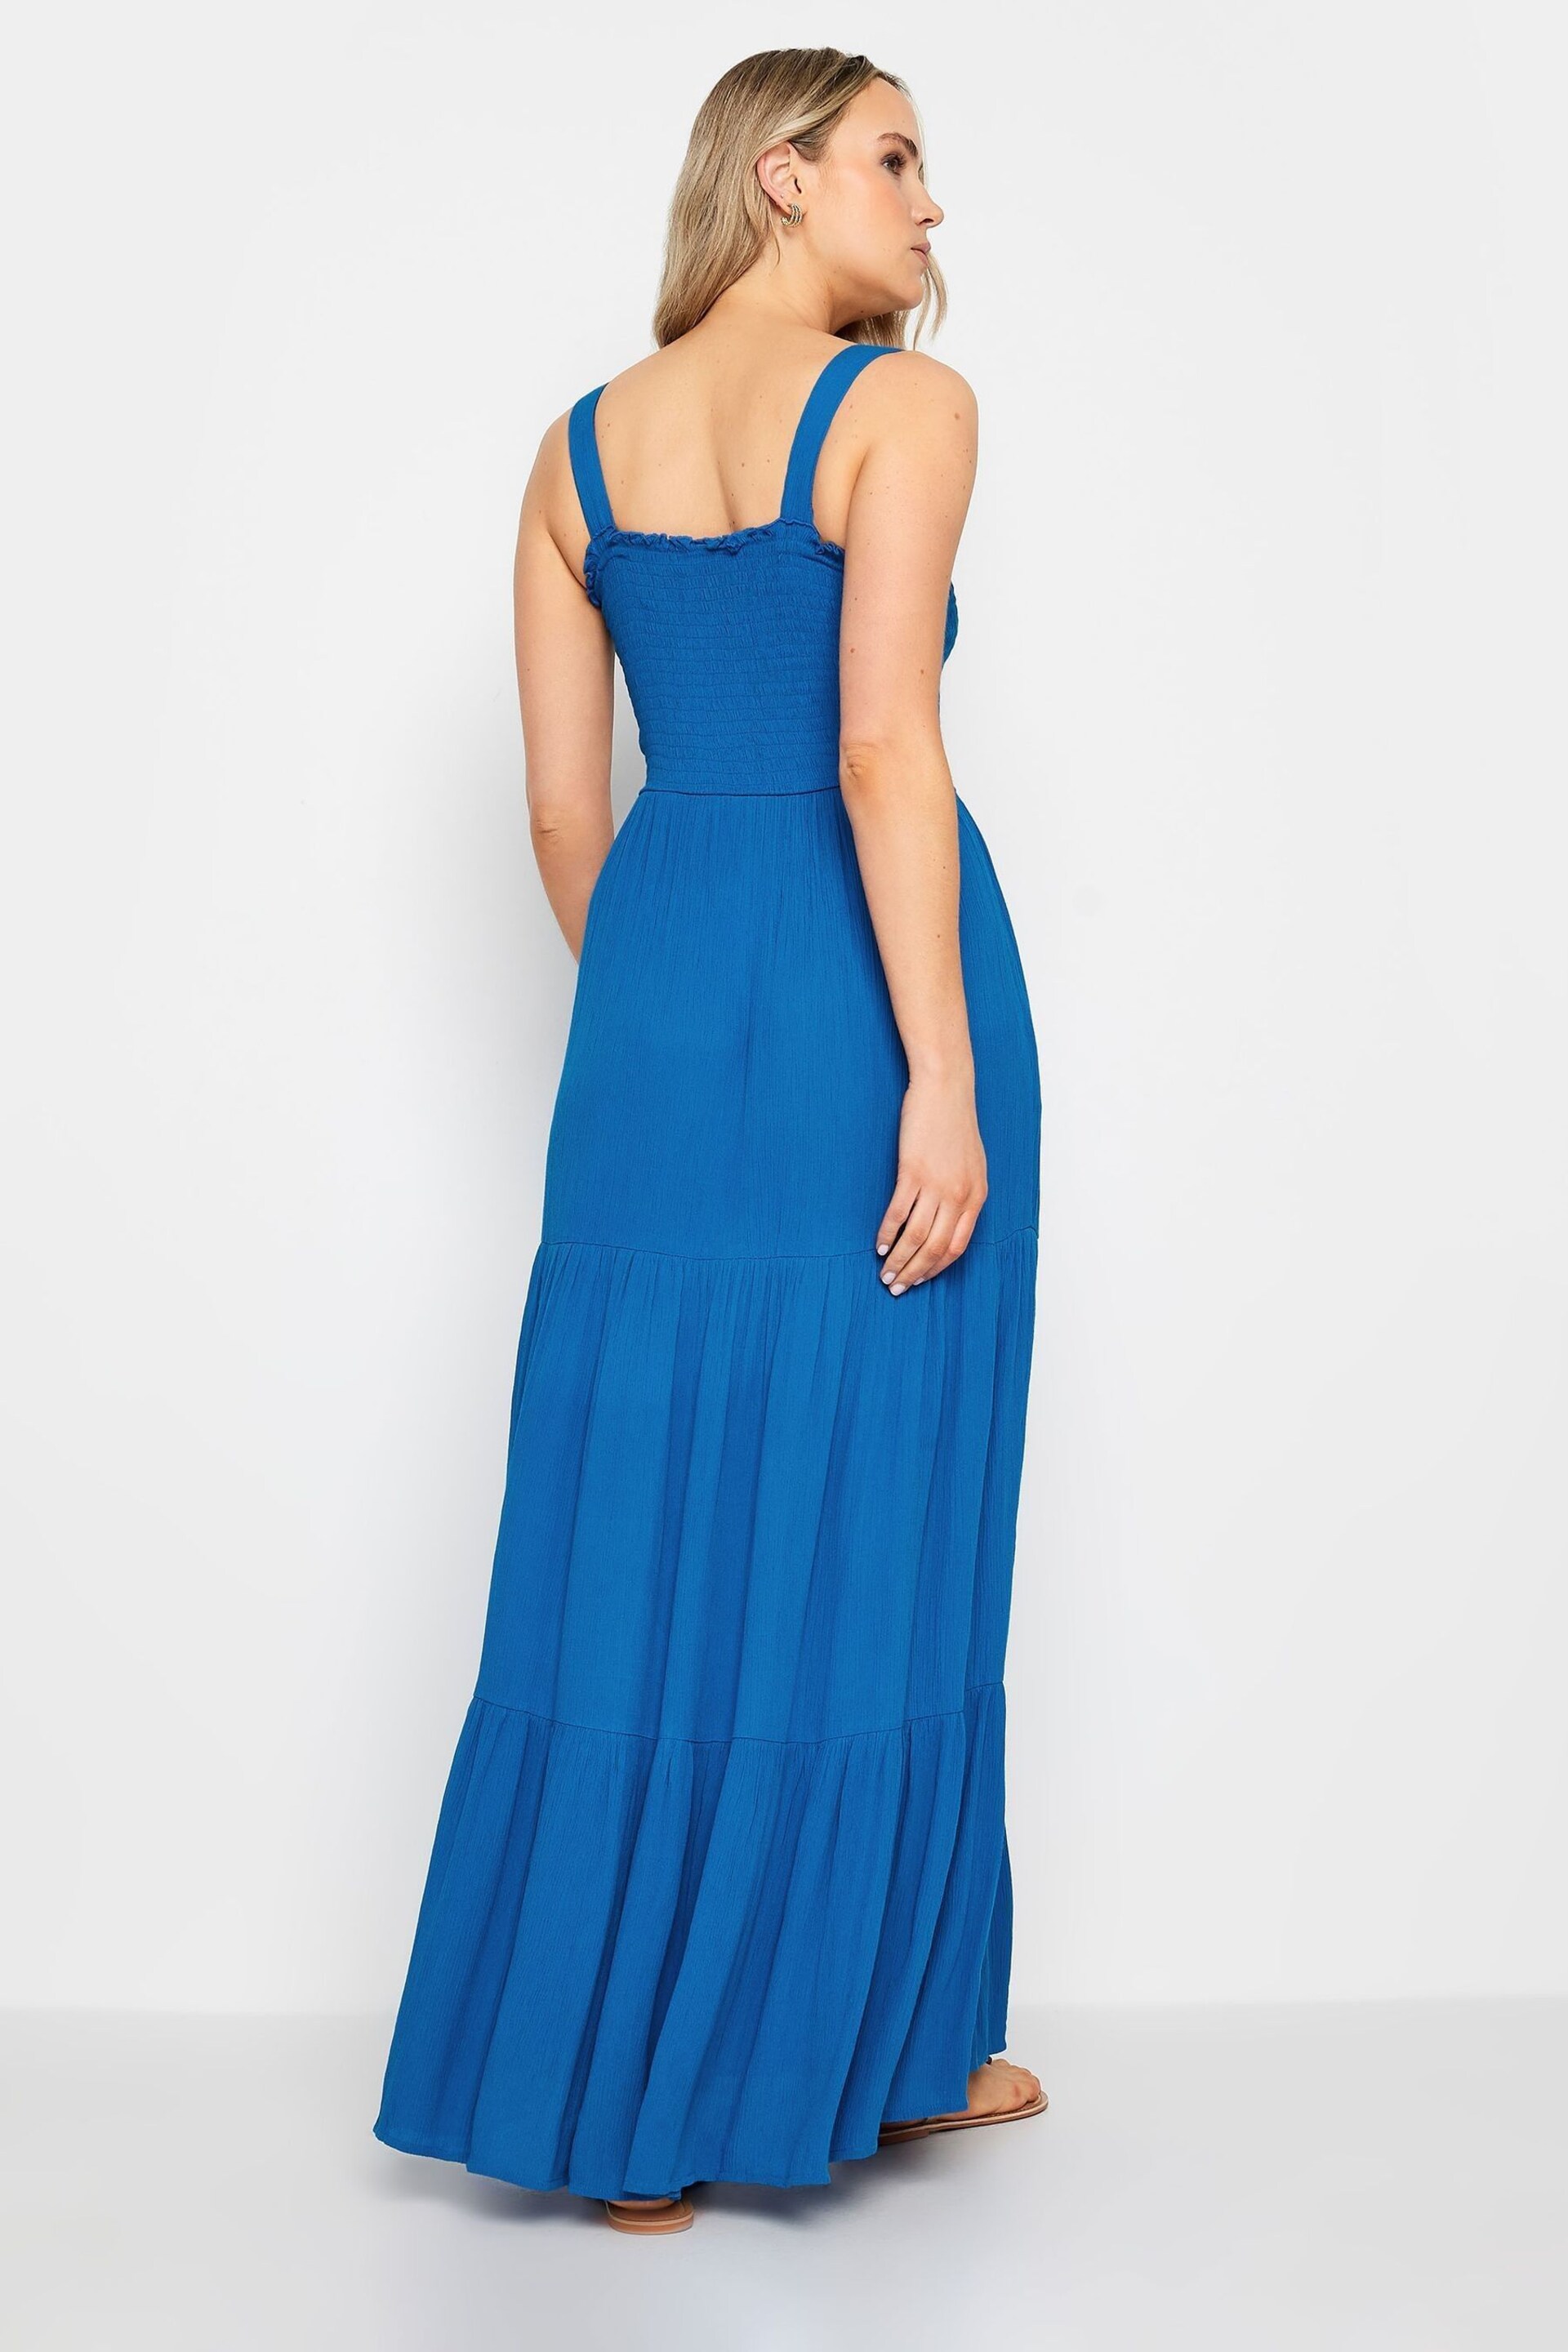 Long Tall Sally Blue Crinkle Tiered Dress - Image 4 of 5